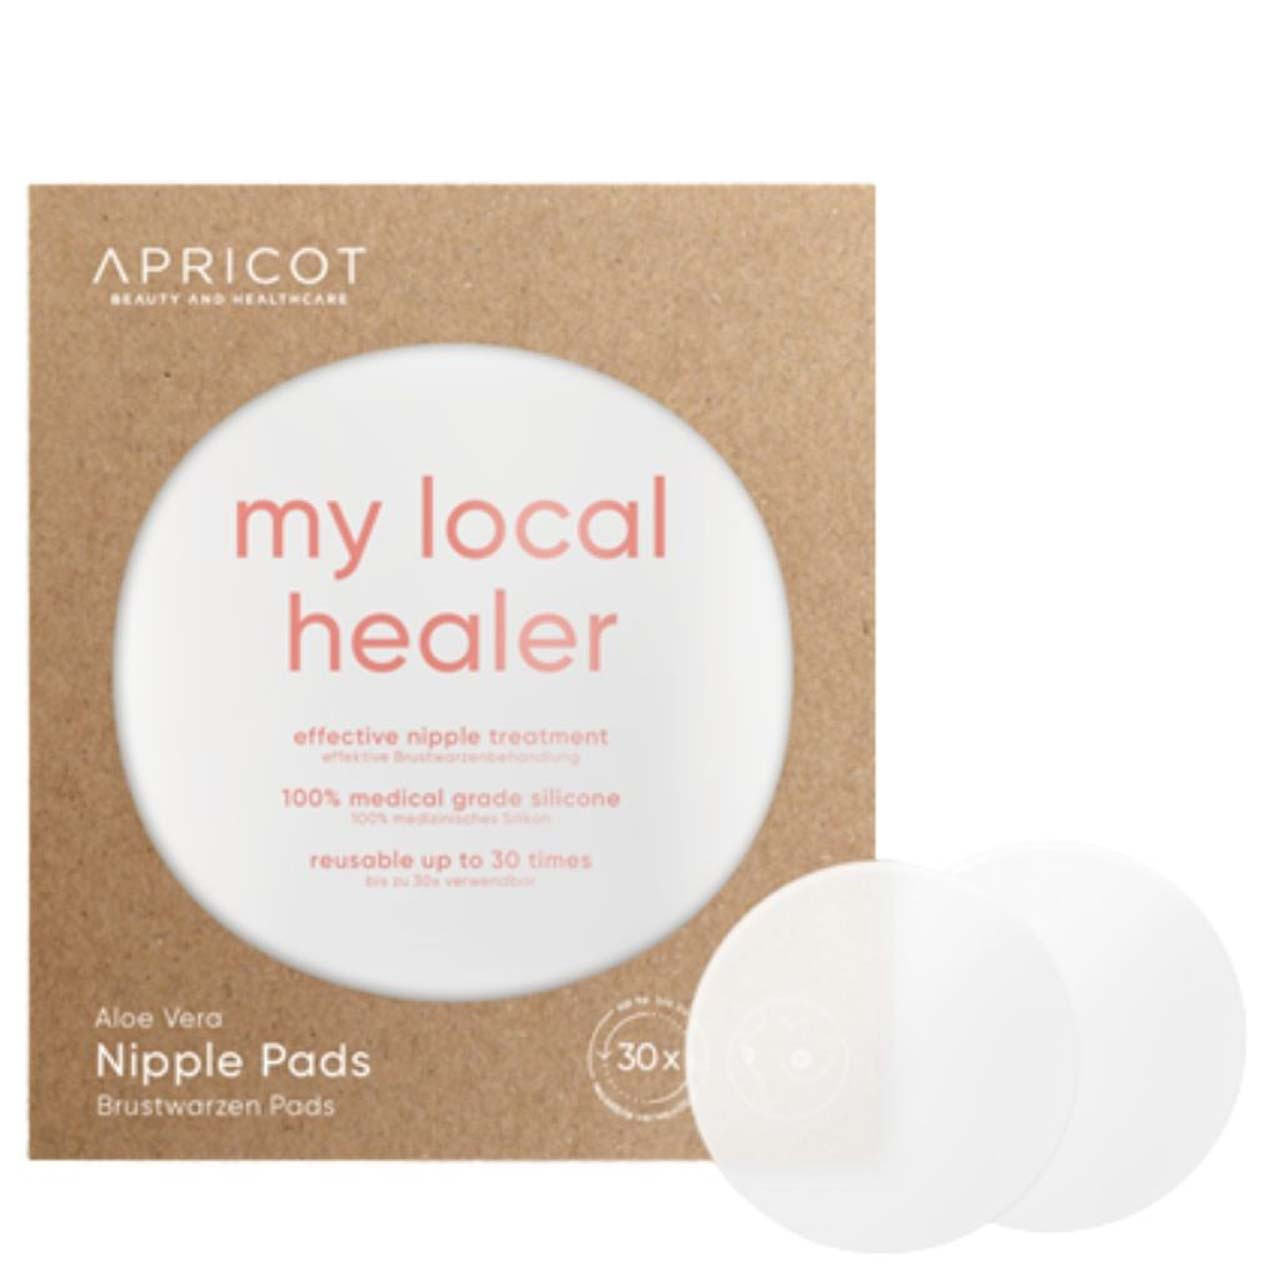 Nipple pads with organic aloe vera - can be used up to 30 times